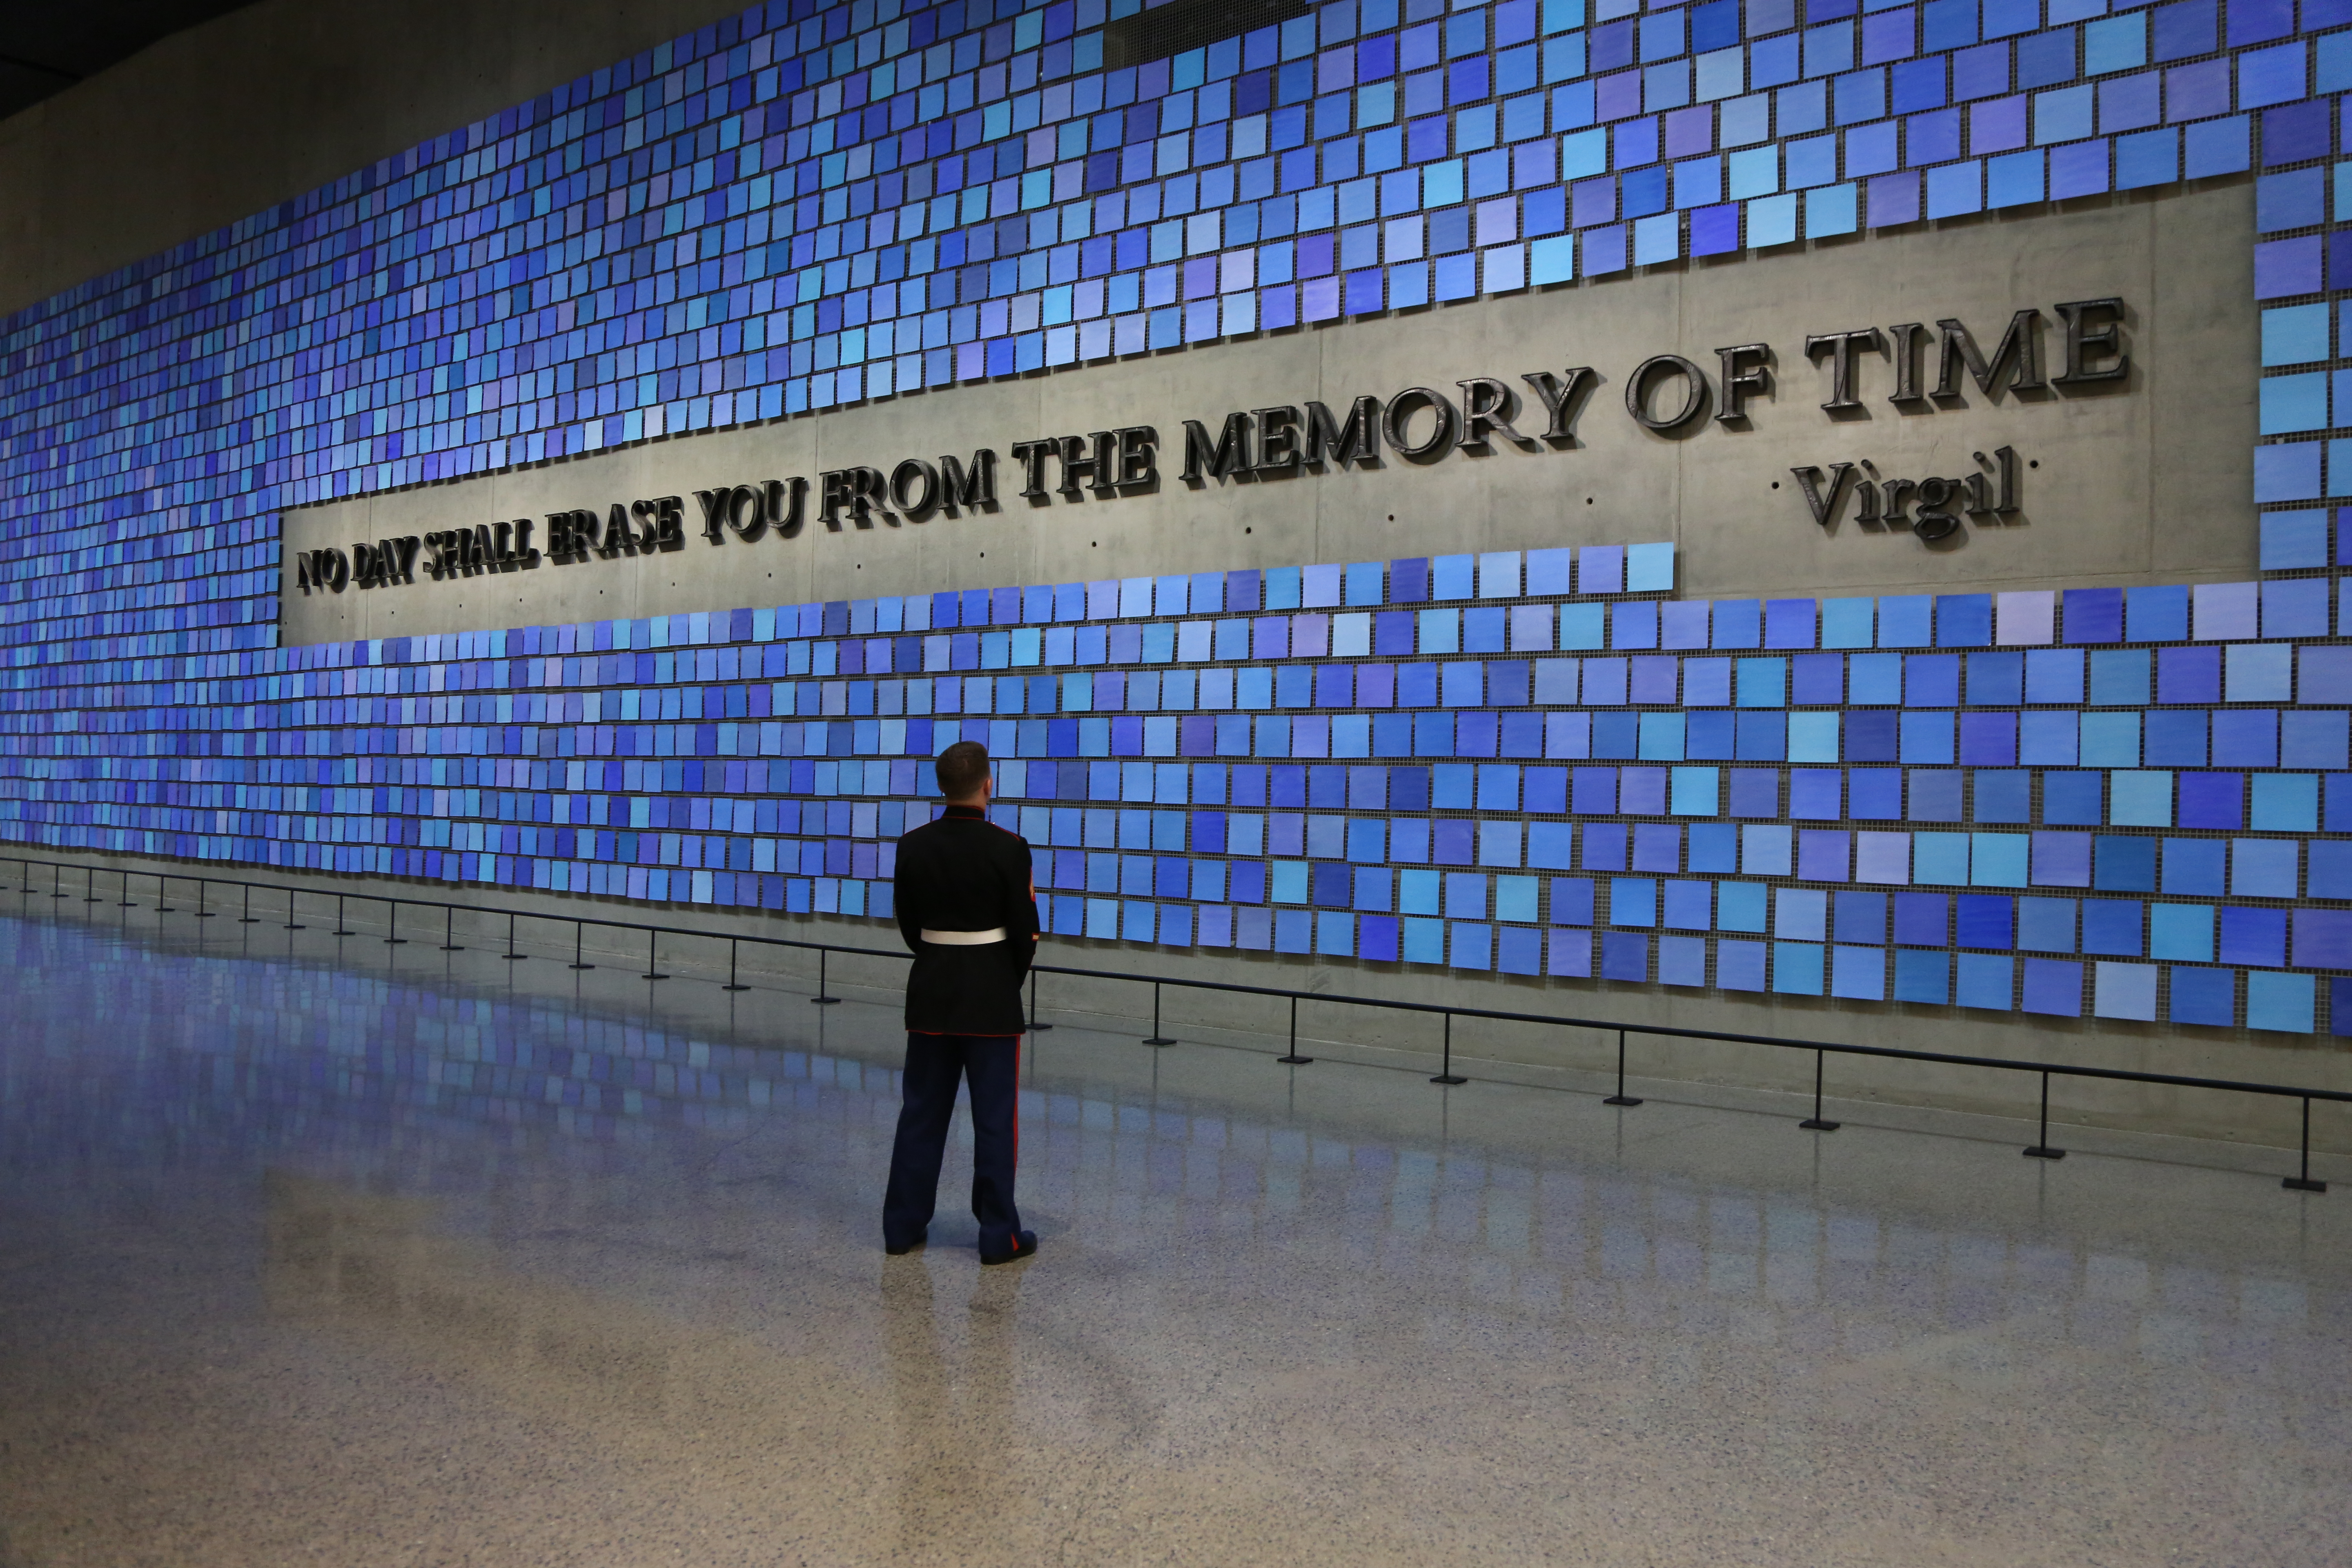 Retired Marine Corporal William Carpenter stands alone in a formal military uniform as he looks at artist Spencer Finch’s Memorial Hall installation “Trying to Remember the Color of the Sky on That September Morning.” The installation includes 2,983 watercolor squares, each in its own shade of blue, and the Virgil quote, “No day shall erase you from the memory of time.”